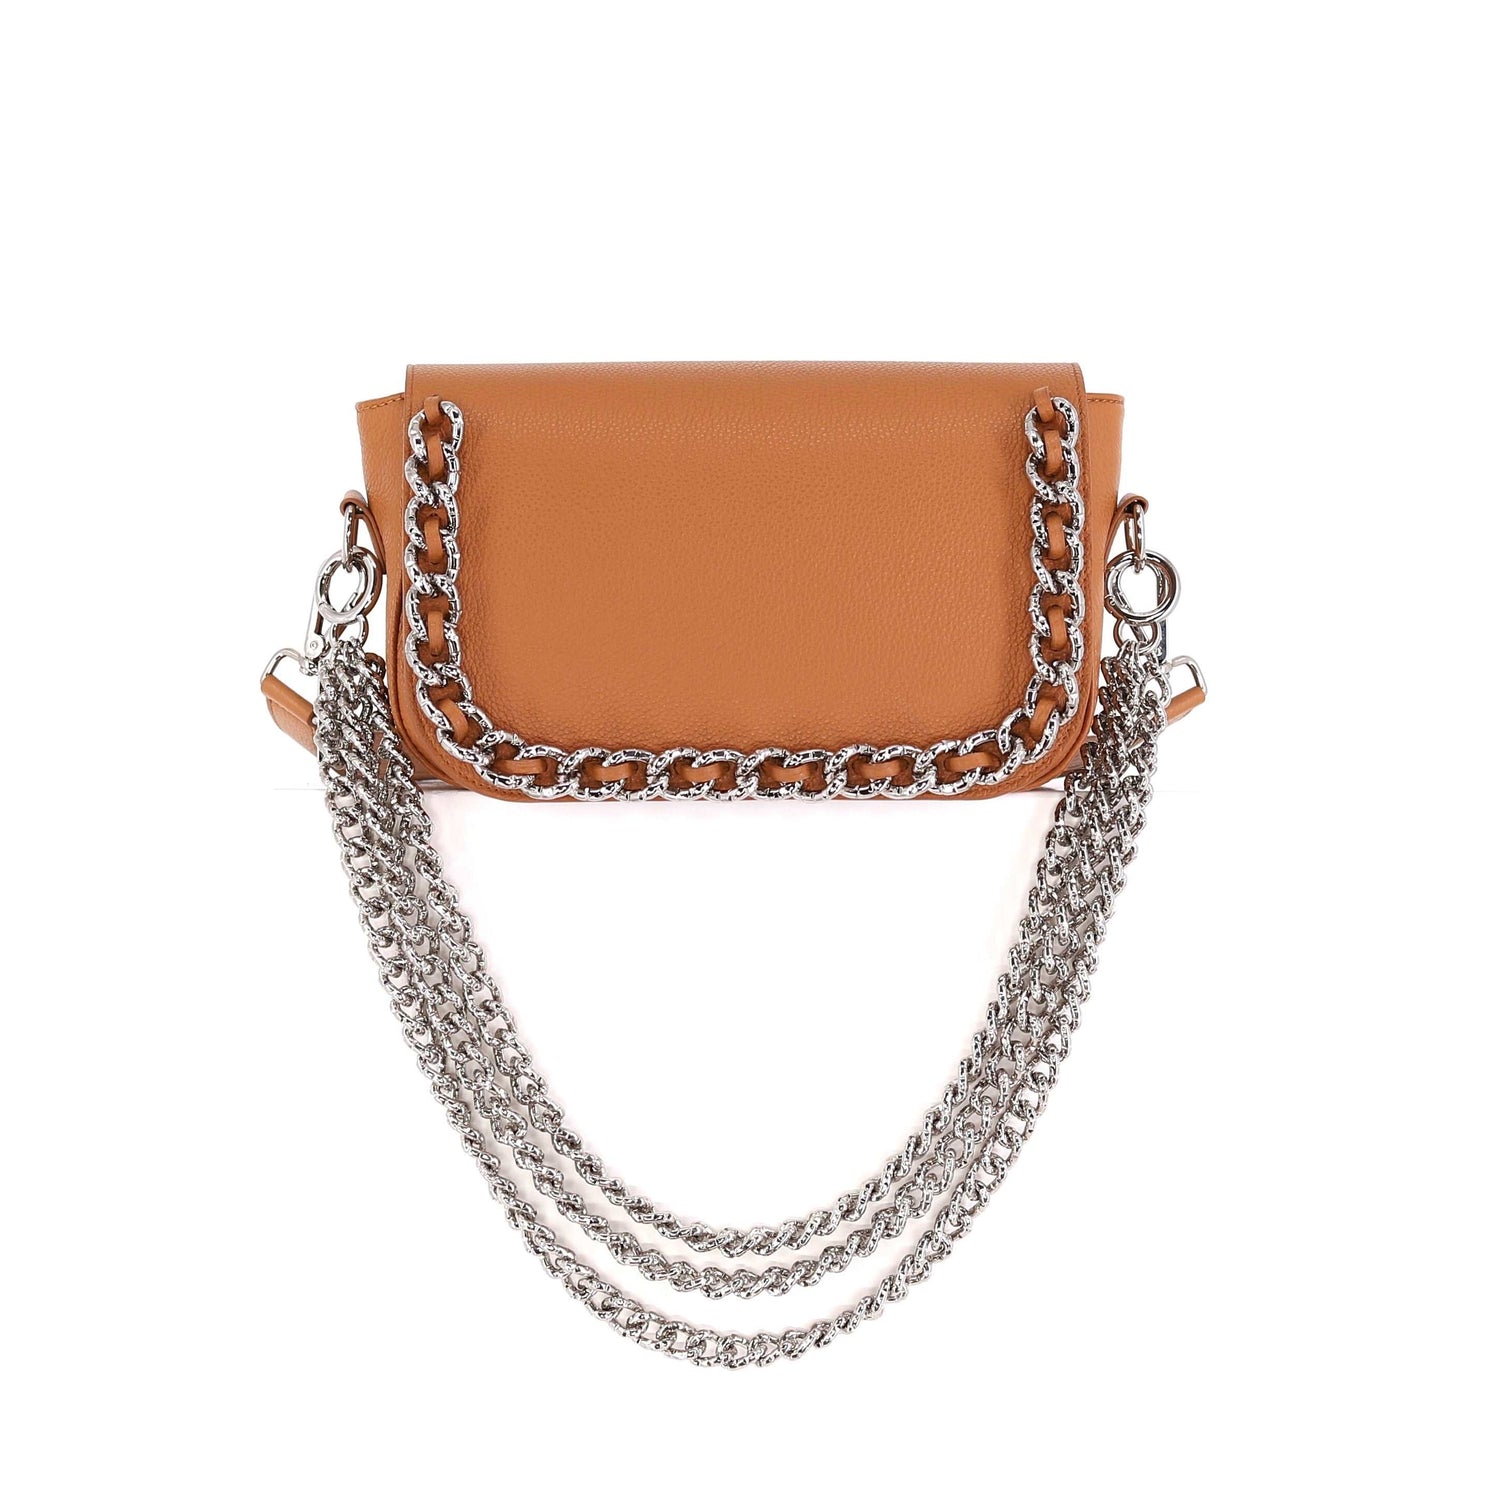 CHAIN ME UP flap genuine leather caramel small